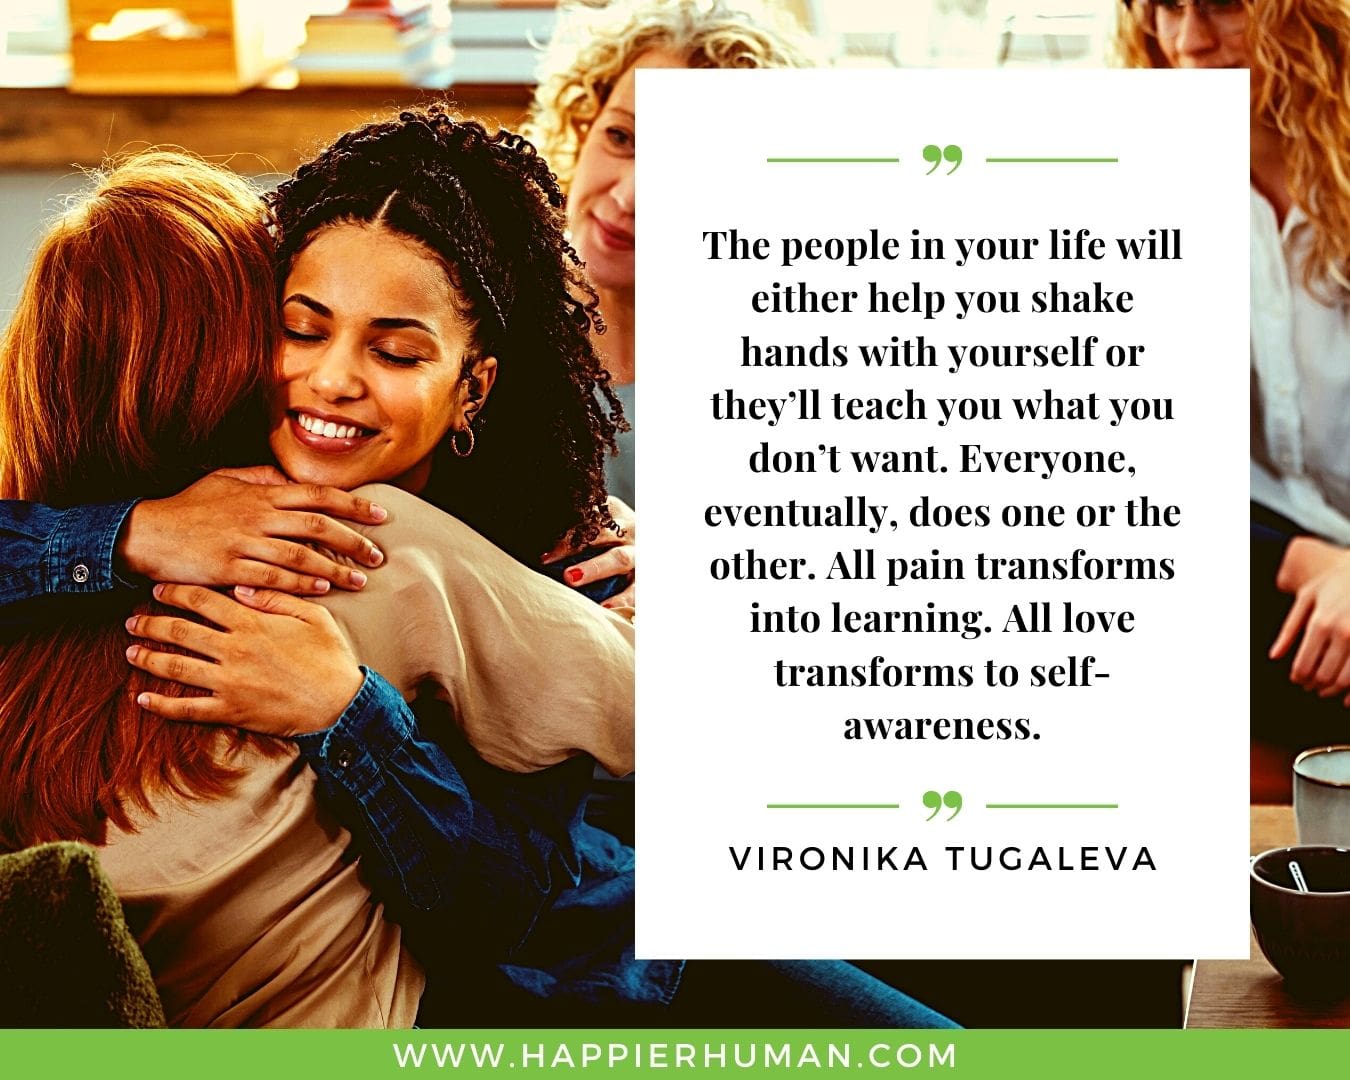 Toxic People Quotes - “The people in your life will either help you shake hands with yourself or they’ll teach you what you don’t want. Everyone, eventually, does one or the other. All pain transforms into learning. All love transforms to self-awareness.” – Vironika Tugaleva